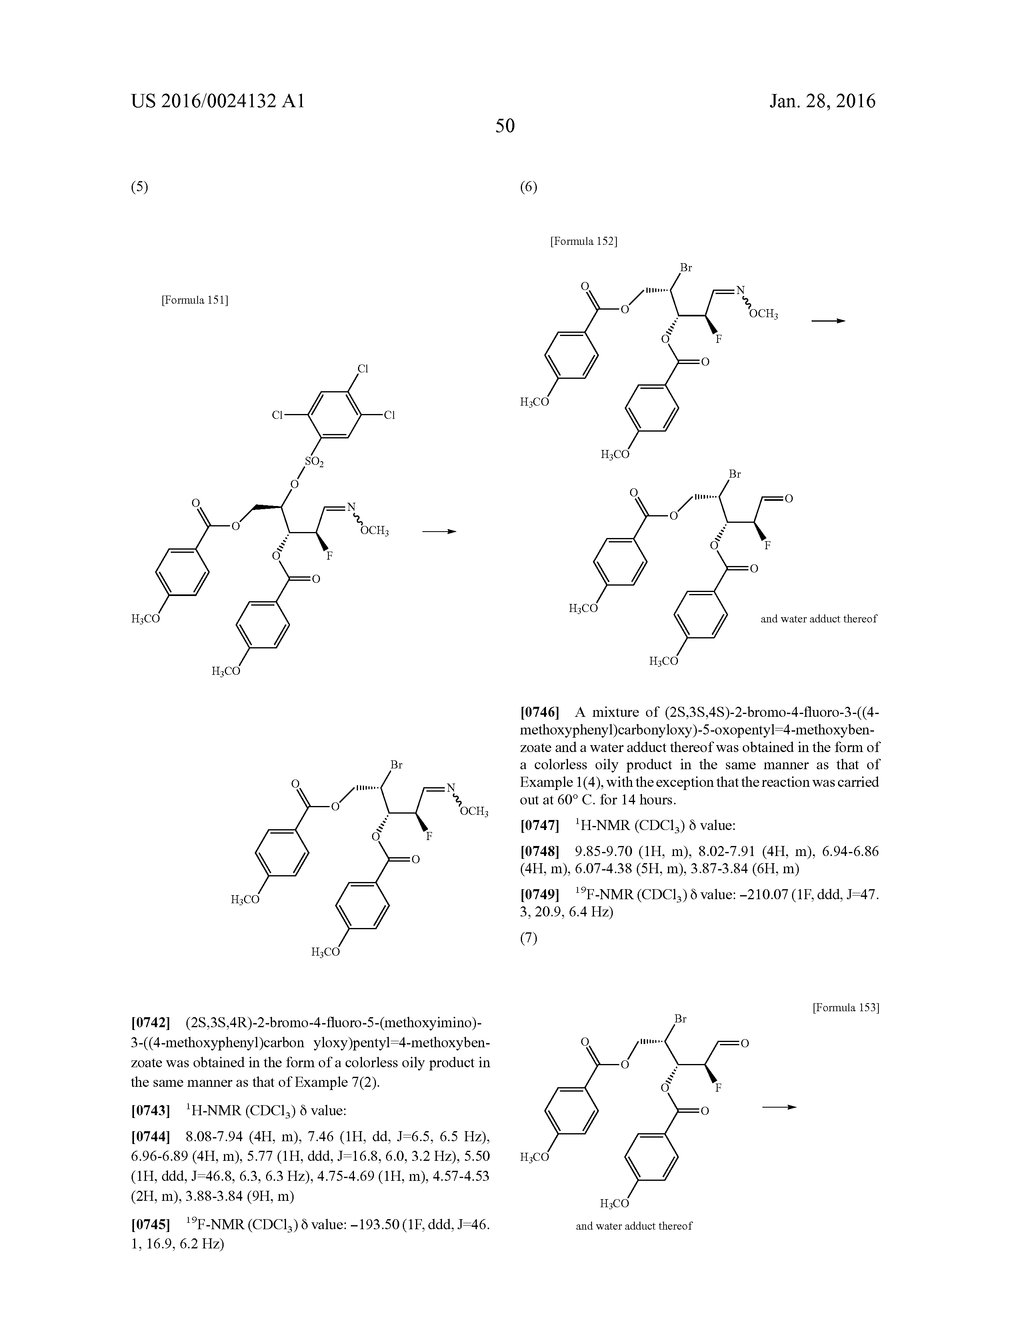 SYNTHETIC INTERMEDIATE OF 1-(2-DEOXY-2-FLUORO-4-THIO- -D-ARABINOFURANOSYL)     CYTOSINE, SYNTHETIC INTERMEDIATE OF THIONUCLEOSIDE, AND METHOD FOR     PRODUCING THE SAME - diagram, schematic, and image 51